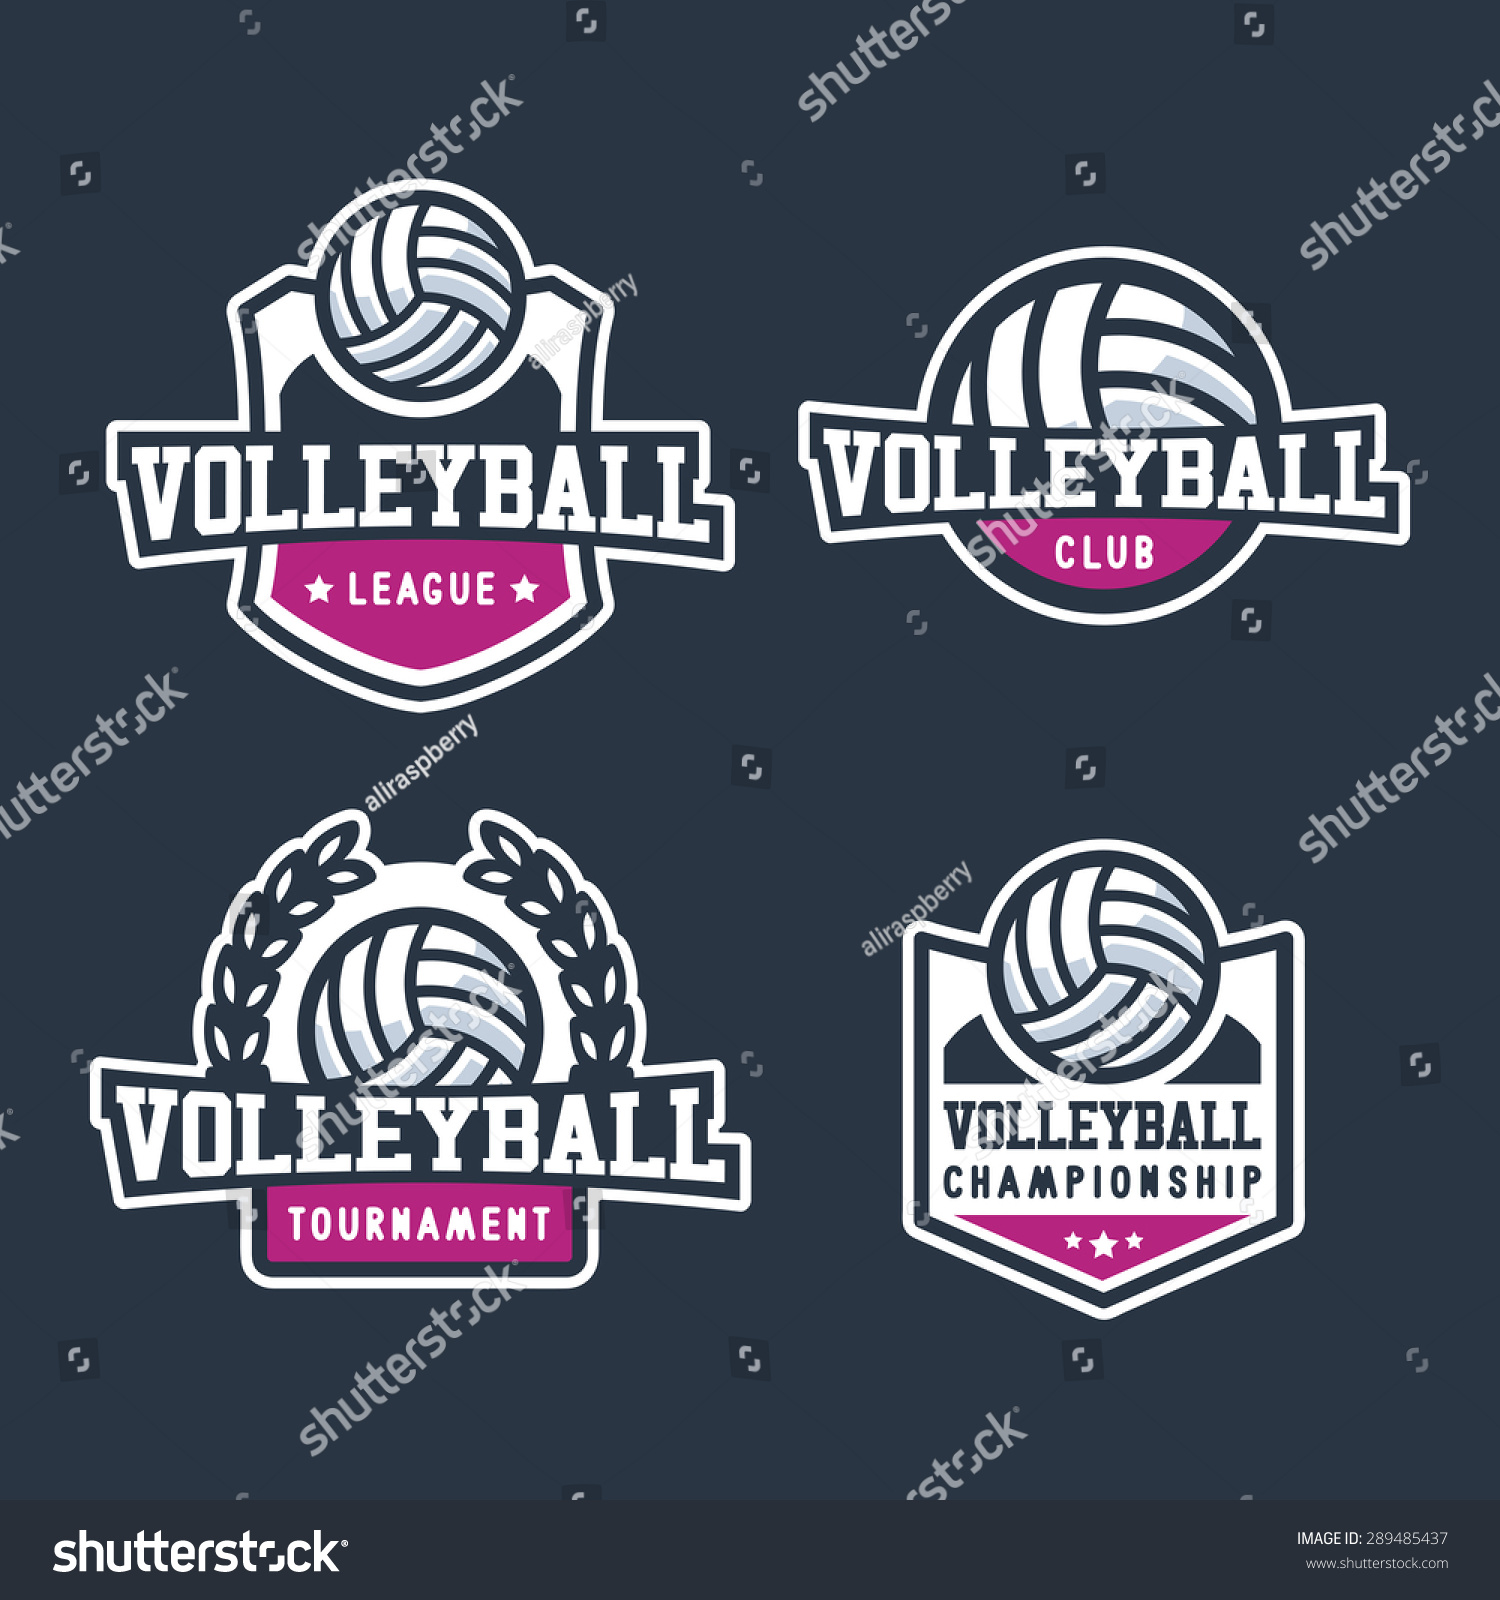 volleyball clipart for t shirts - photo #38